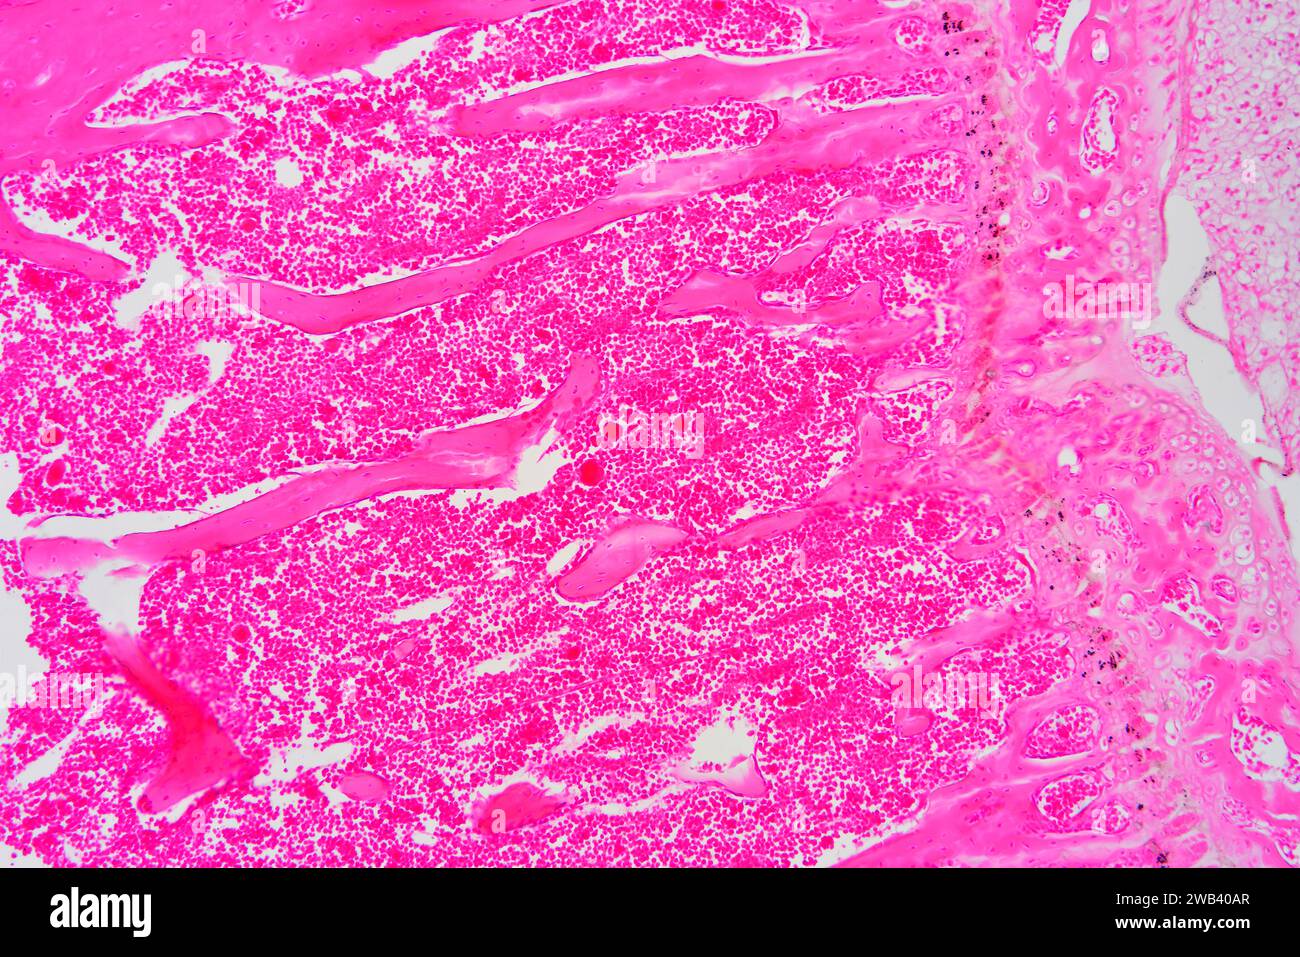 Human dense regular connective tissue. X75 at 10 cm wide. Stock Photo